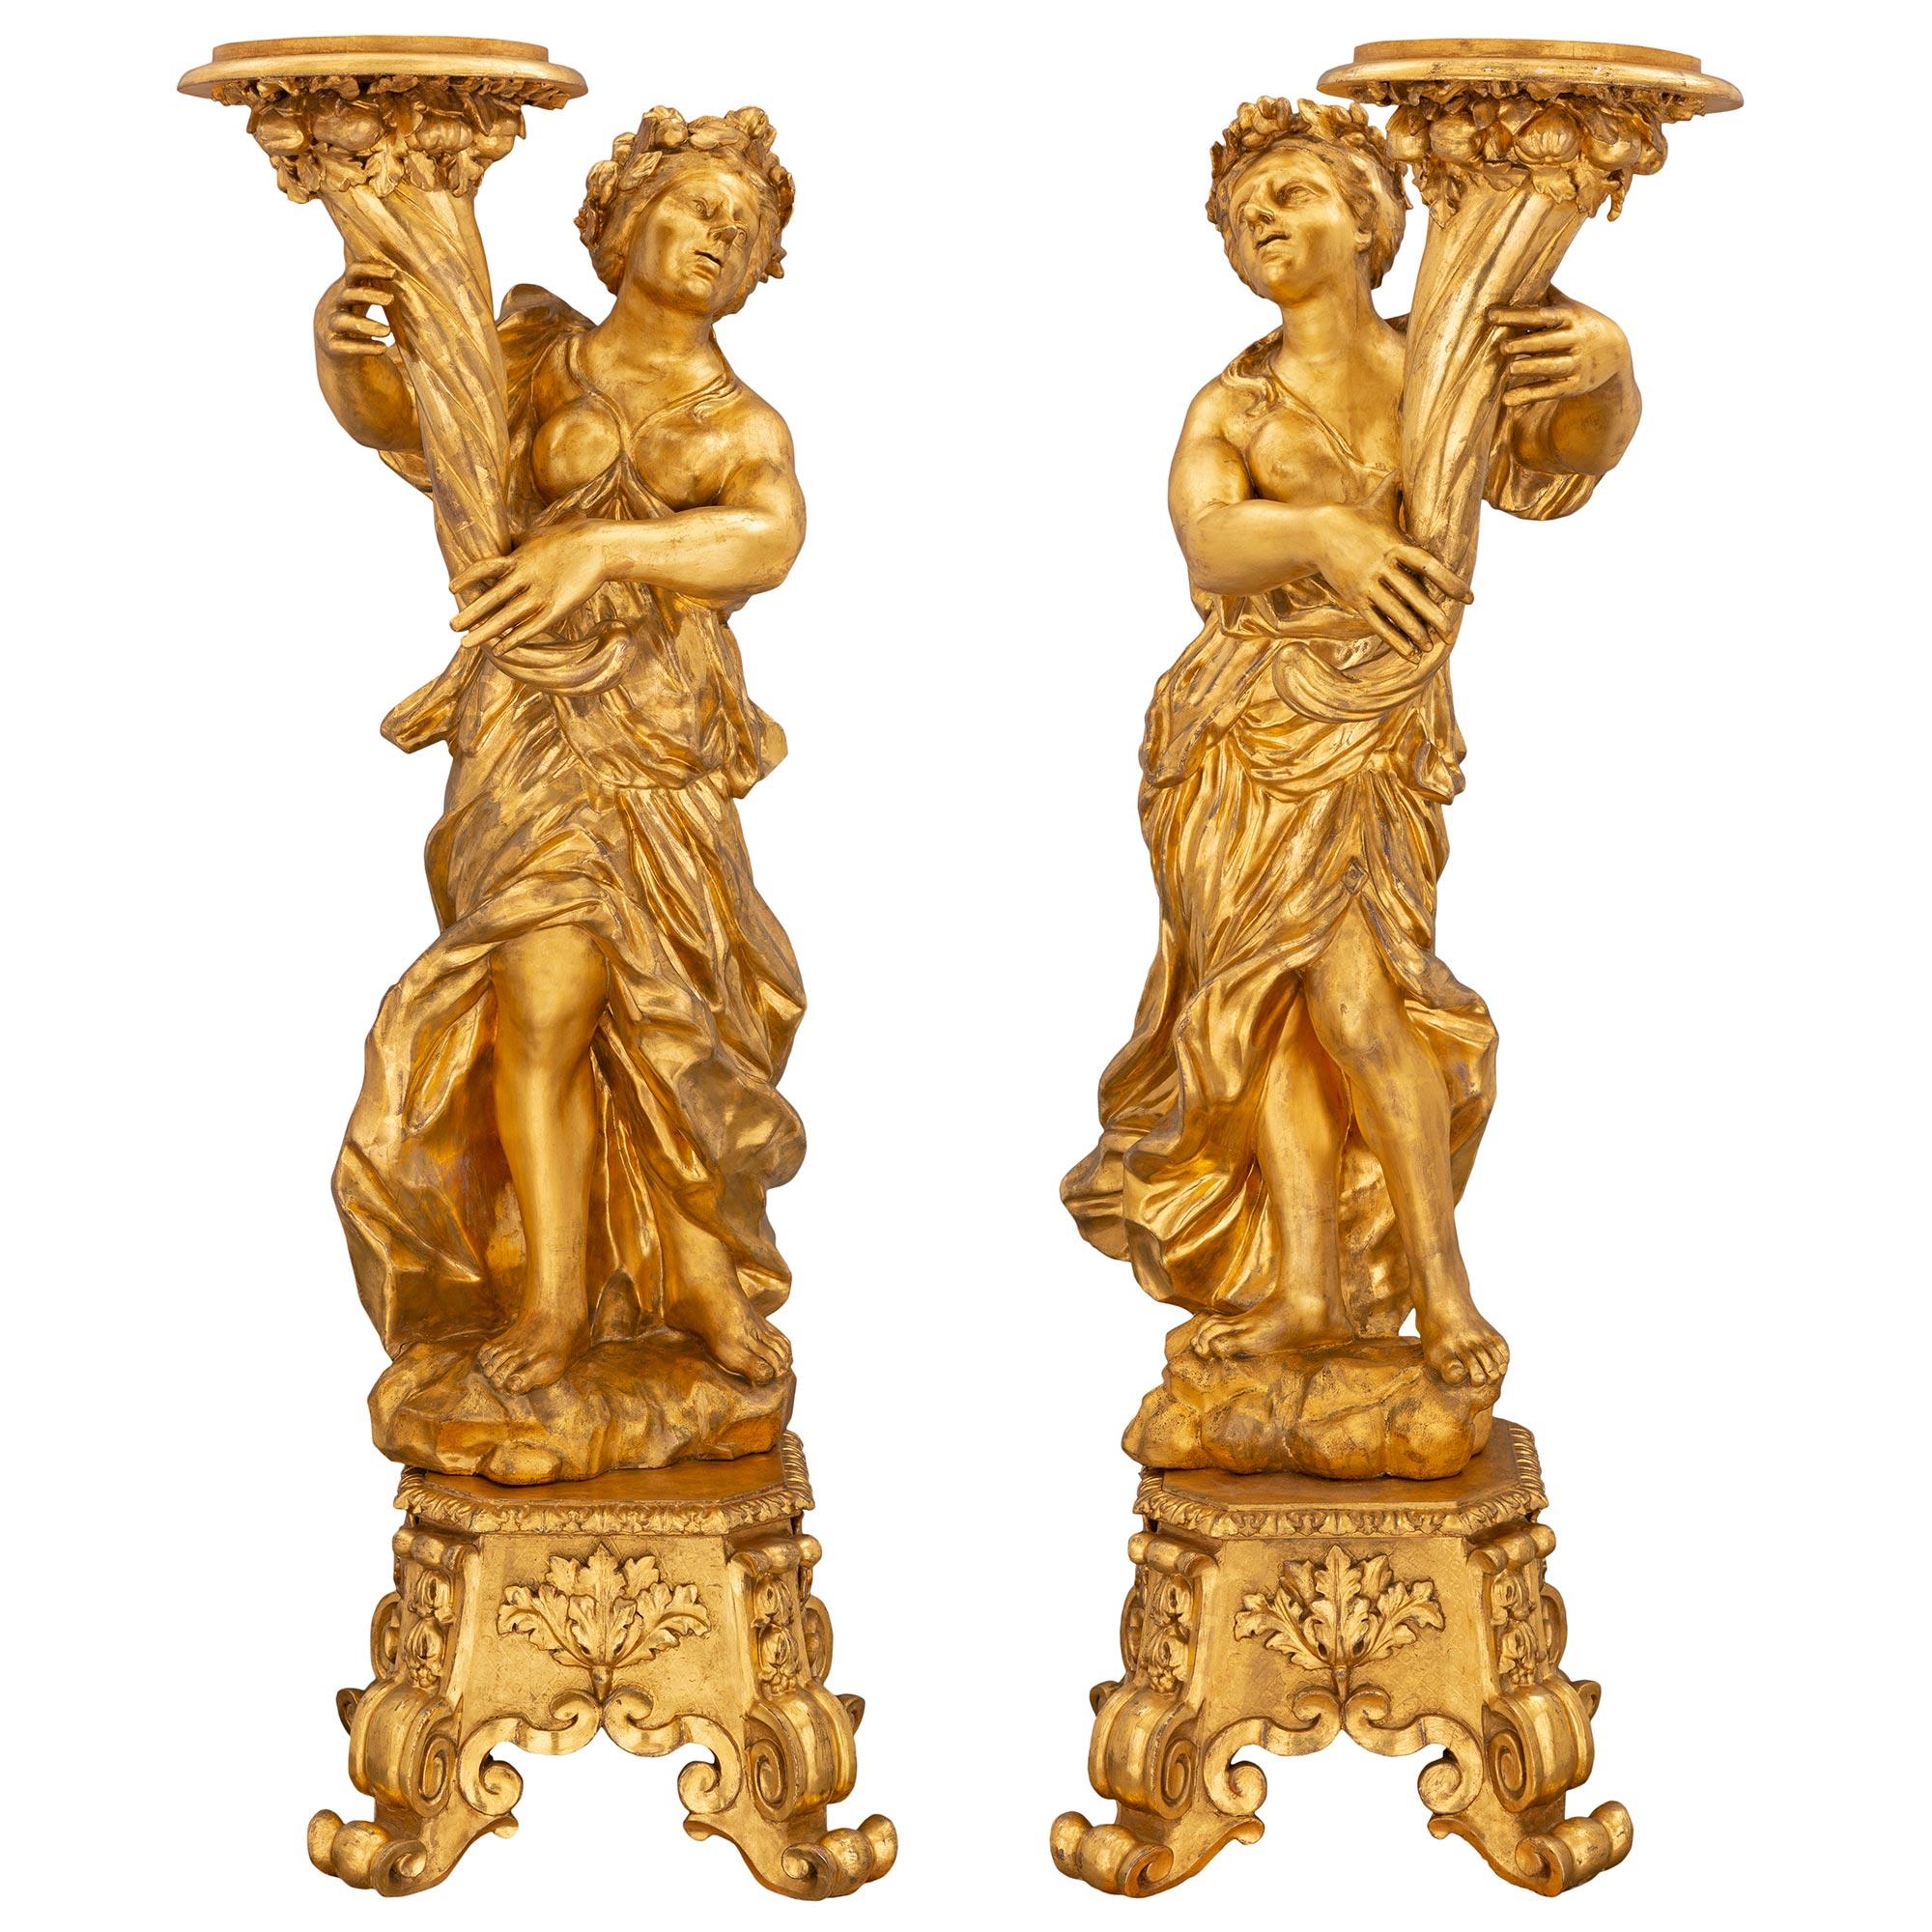 A sensational and monumentally scaled true pair of Italian late 17th century Baroque period giltwood Torchières. Each torchière is raised by a square tapered base with striking most decorative scrolled feet and elegant carvings of foliate designs